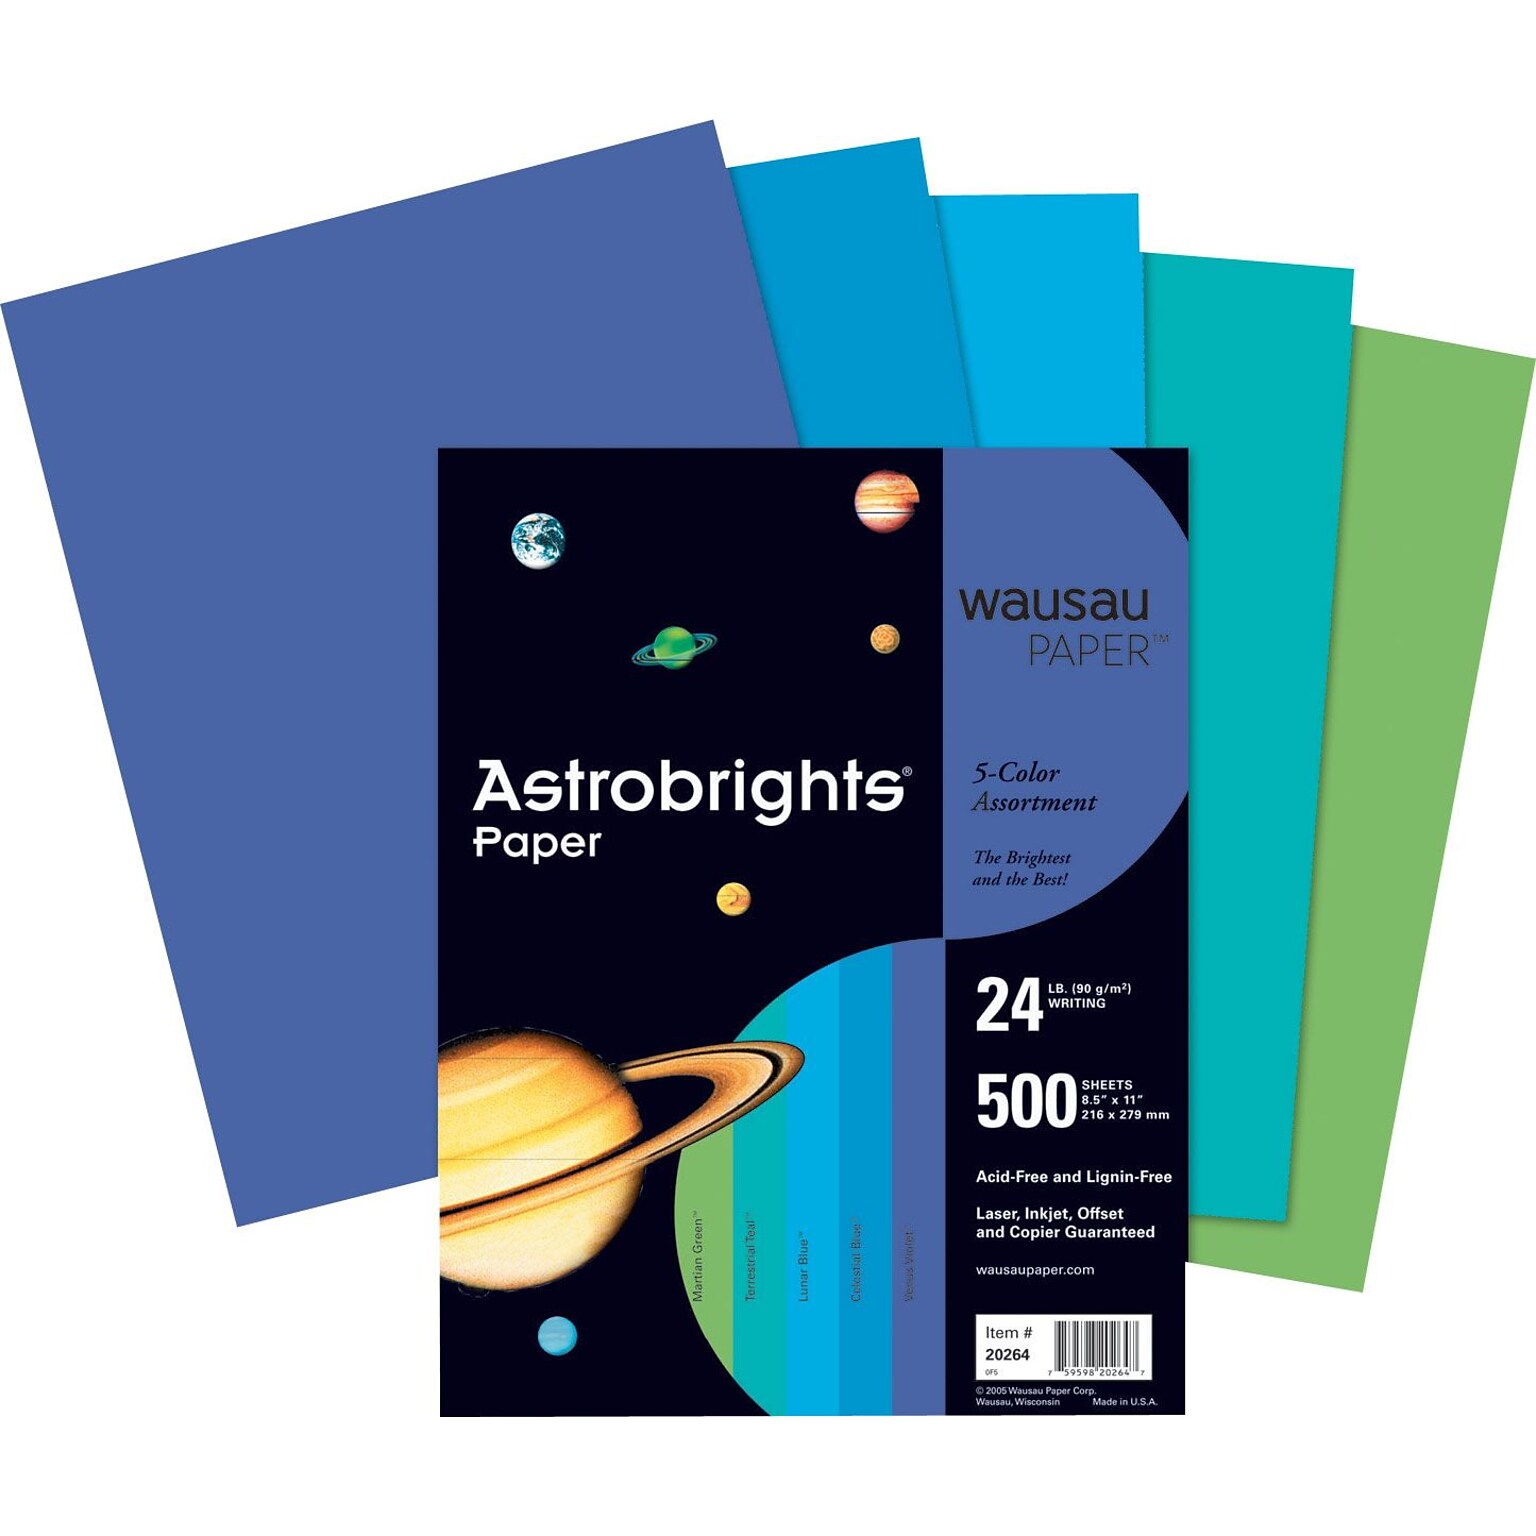 Astrobrights Wausau 8.5 x 11, Colored Paper, 24 lbs., Assorted Cool Colors, 500 Sheets/Ream (WAU20274)